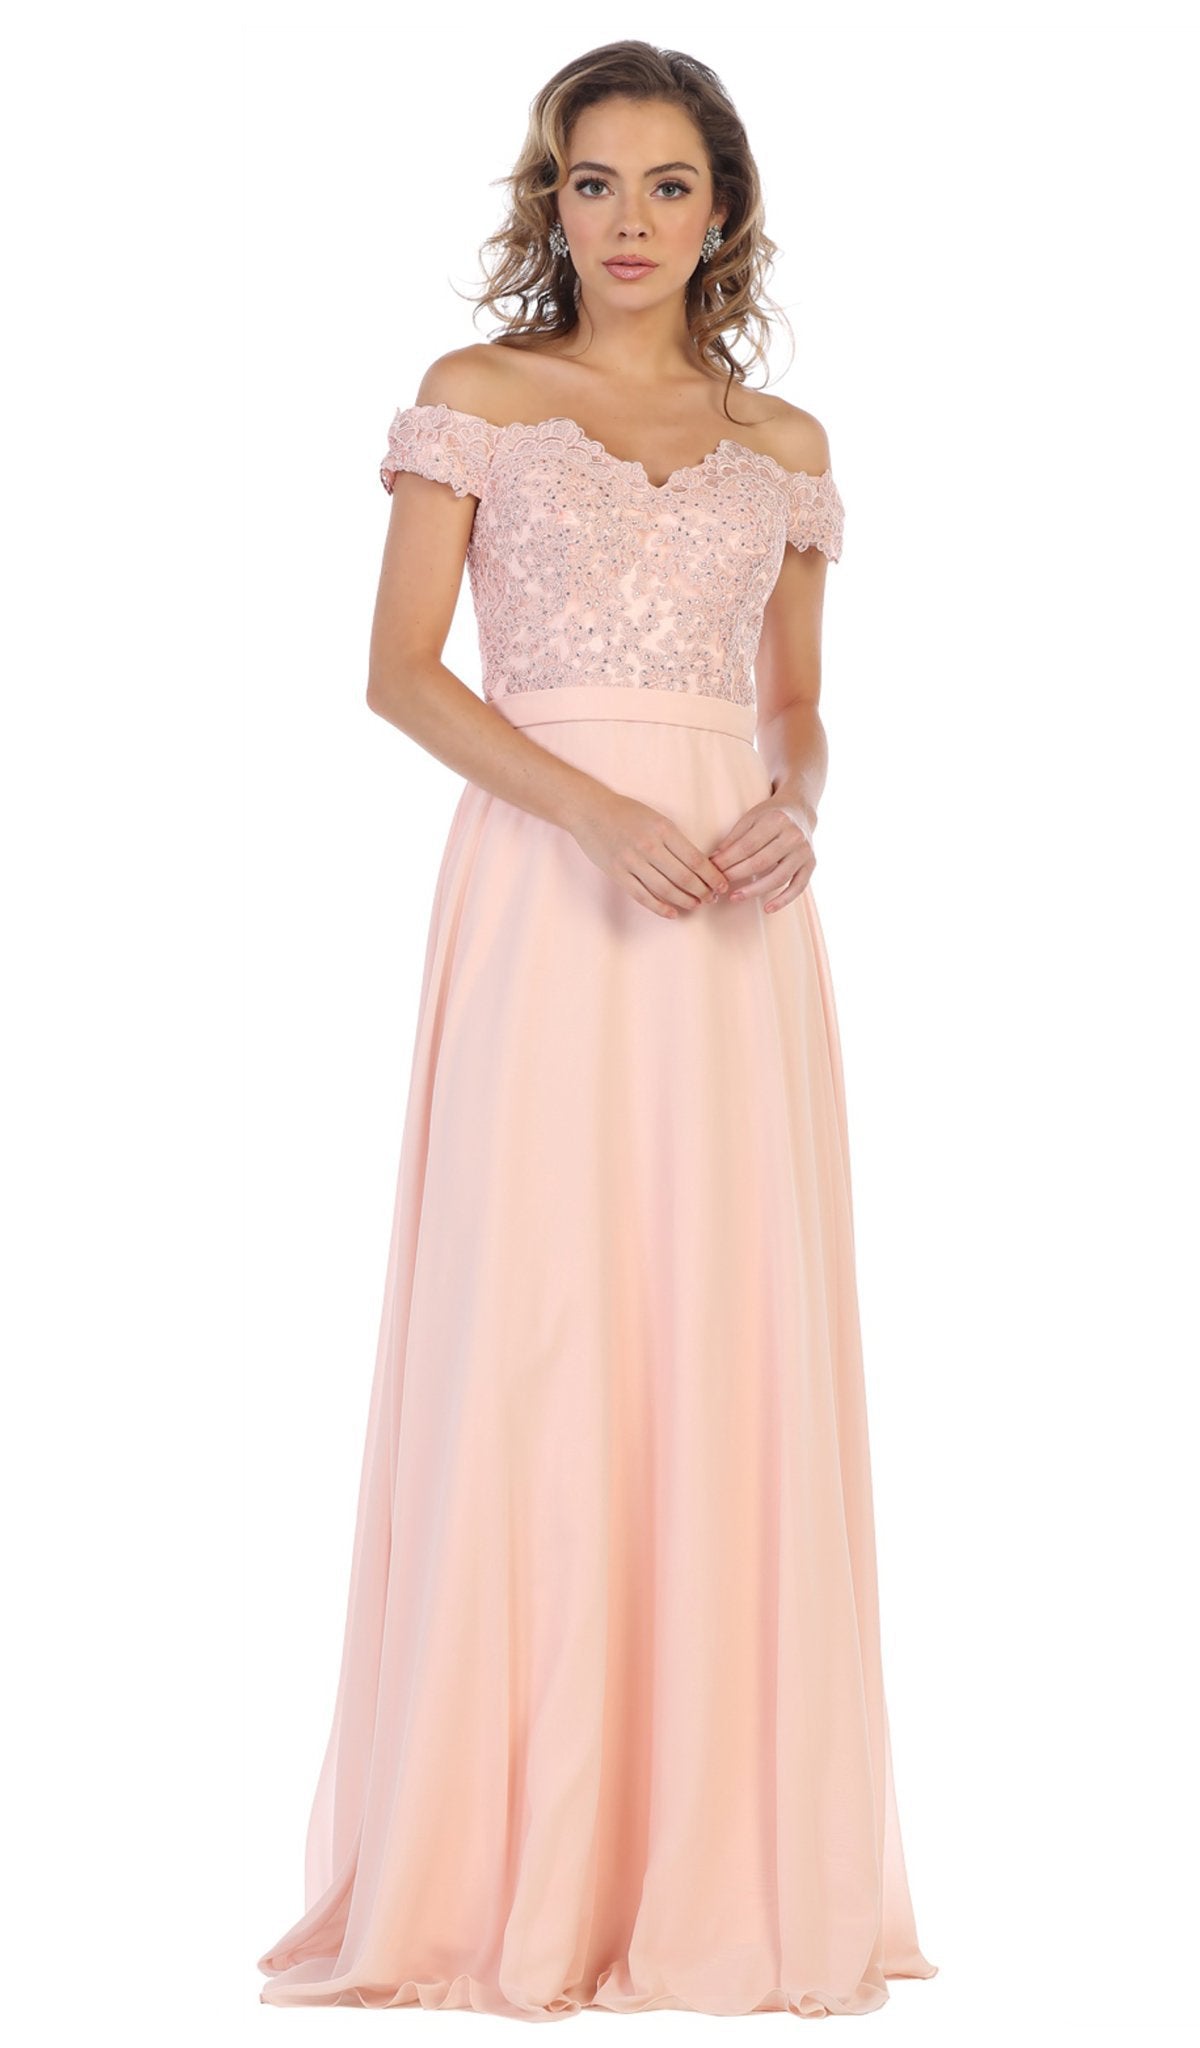 May Queen - MQ1601B Applique Off-Shoulder A-line Gown Special Occasion Dress 6XL / Blush